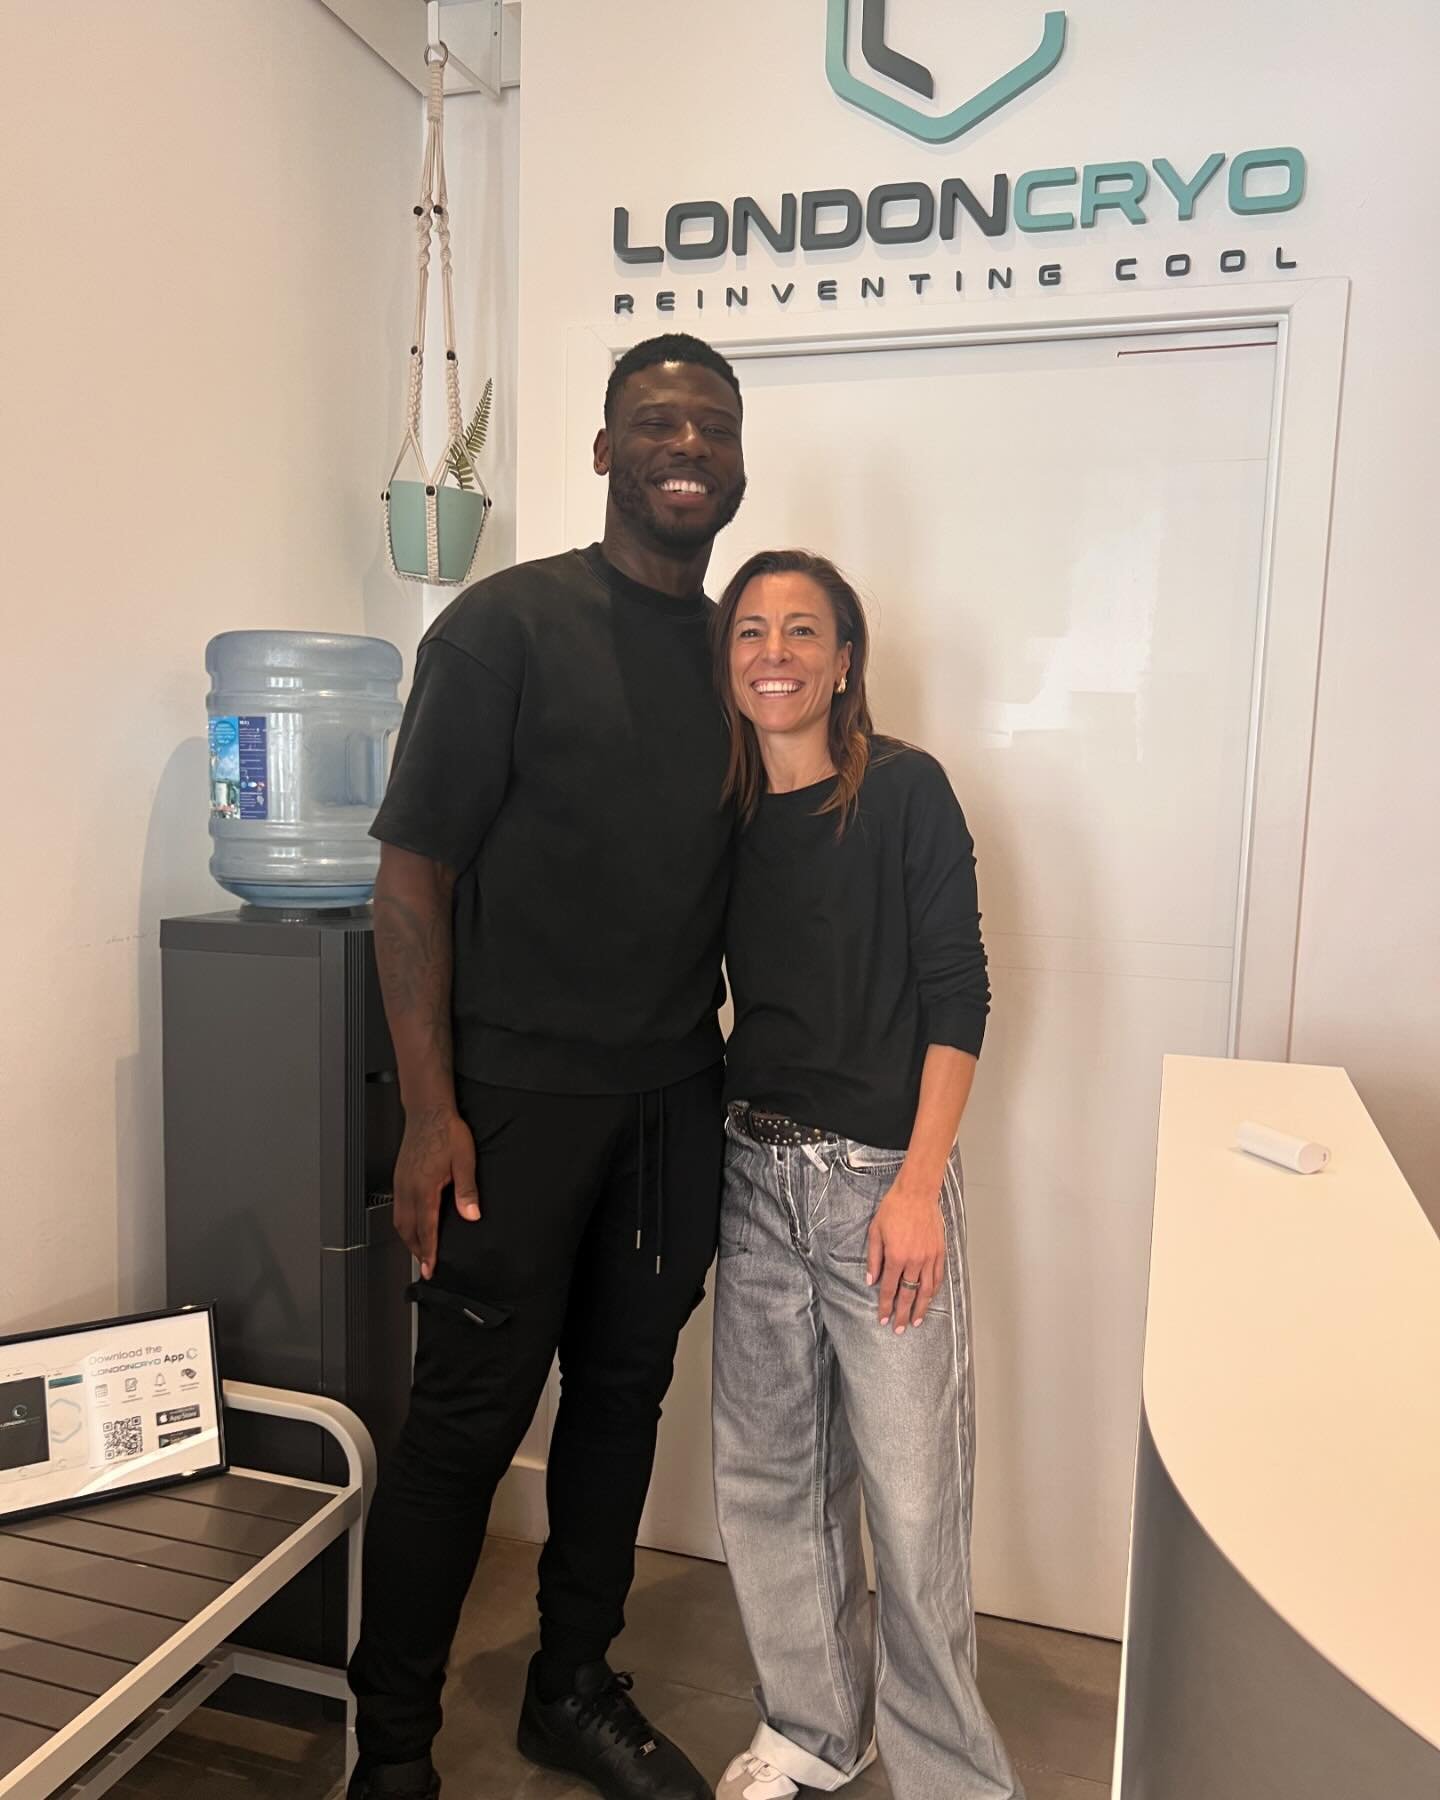 How it&rsquo;s going 2024&hellip;,how it started 2017. The OG of LondonCryo  @chamberlain_  Great to see you champ 🥊in for a recovery session with us between his press conference #londoncryo #wellness #recovery #reinventingcool #recoverlikeapro